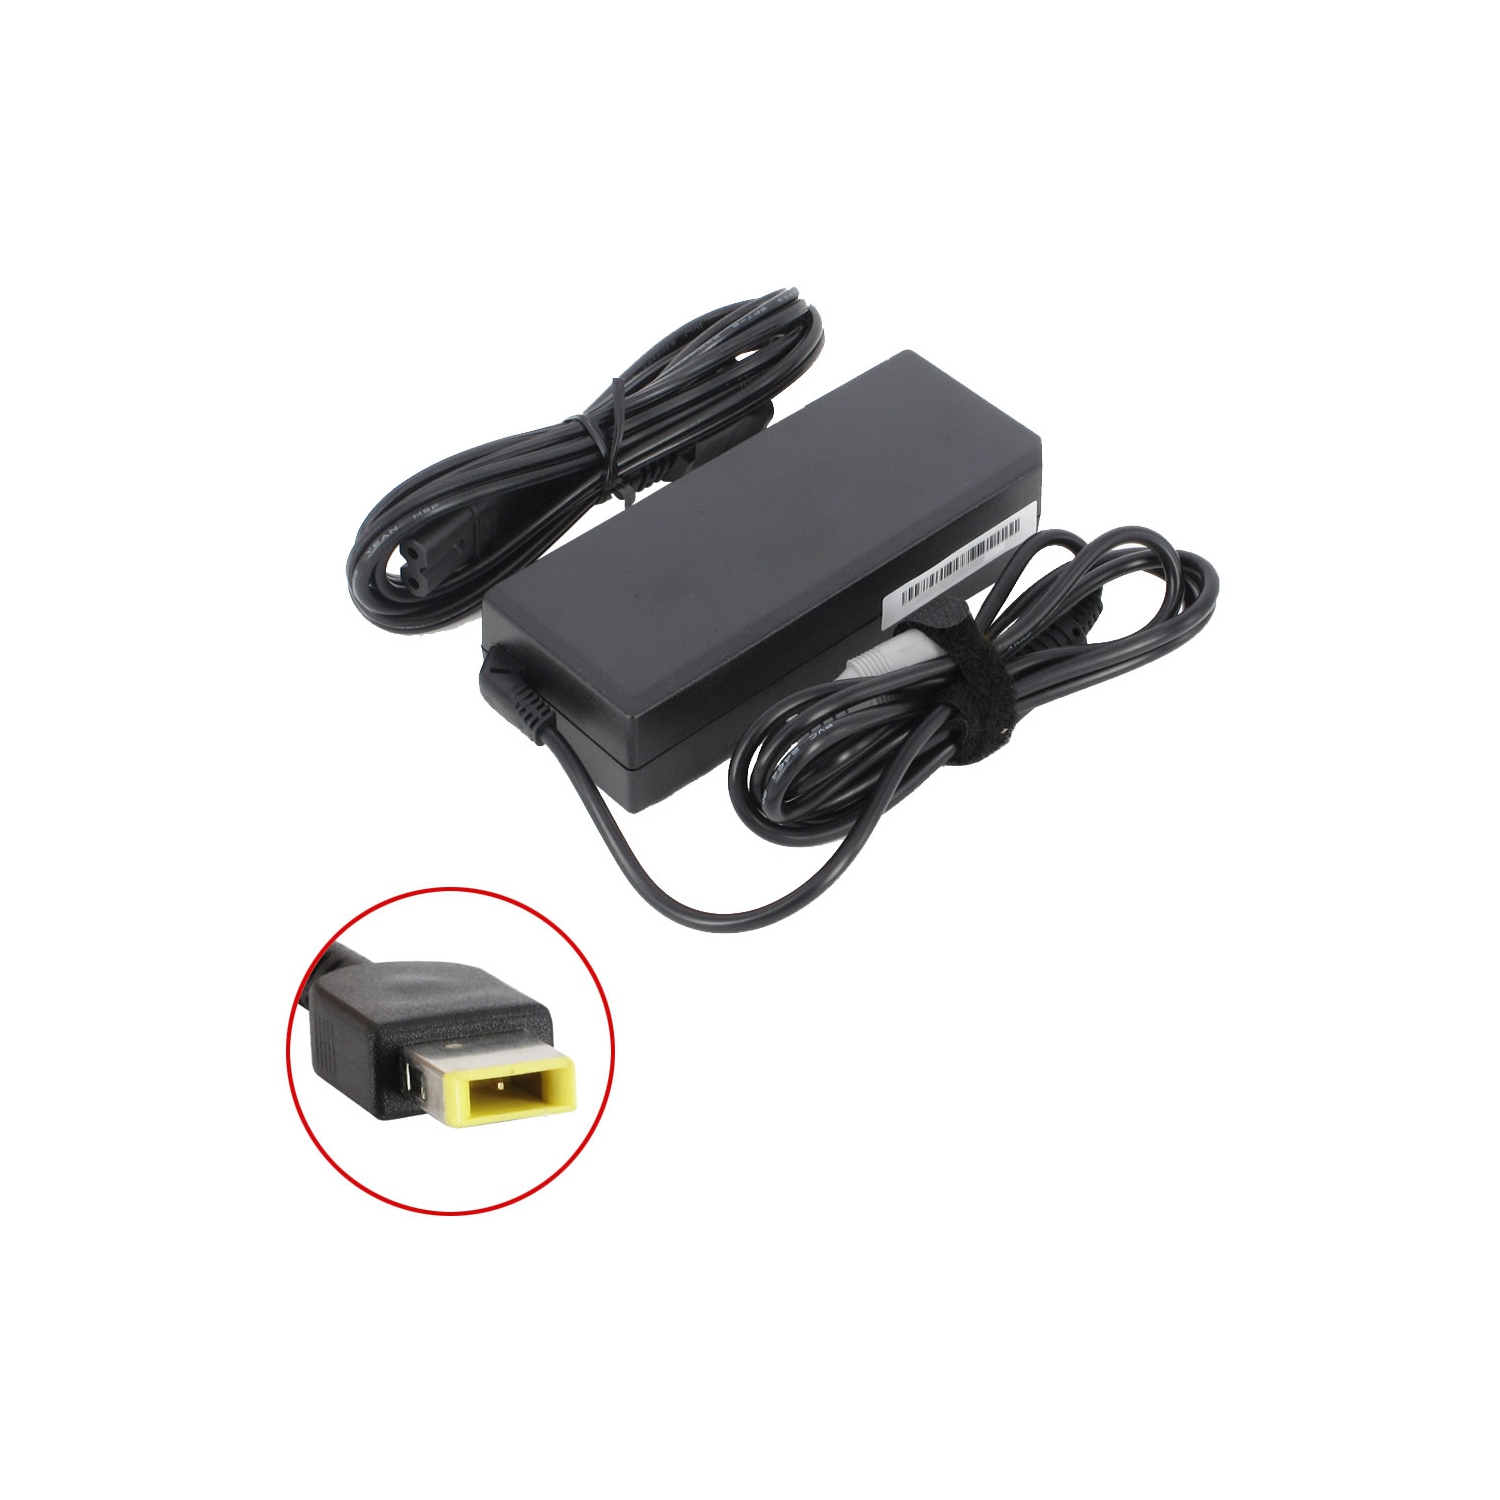 Brand New Laptop AC Adapter for Lenovo IdeaPad 500S-14ISK, ADP-65XB A, 0B47481, 45N0293, 45N0482, PA-1650-37LF